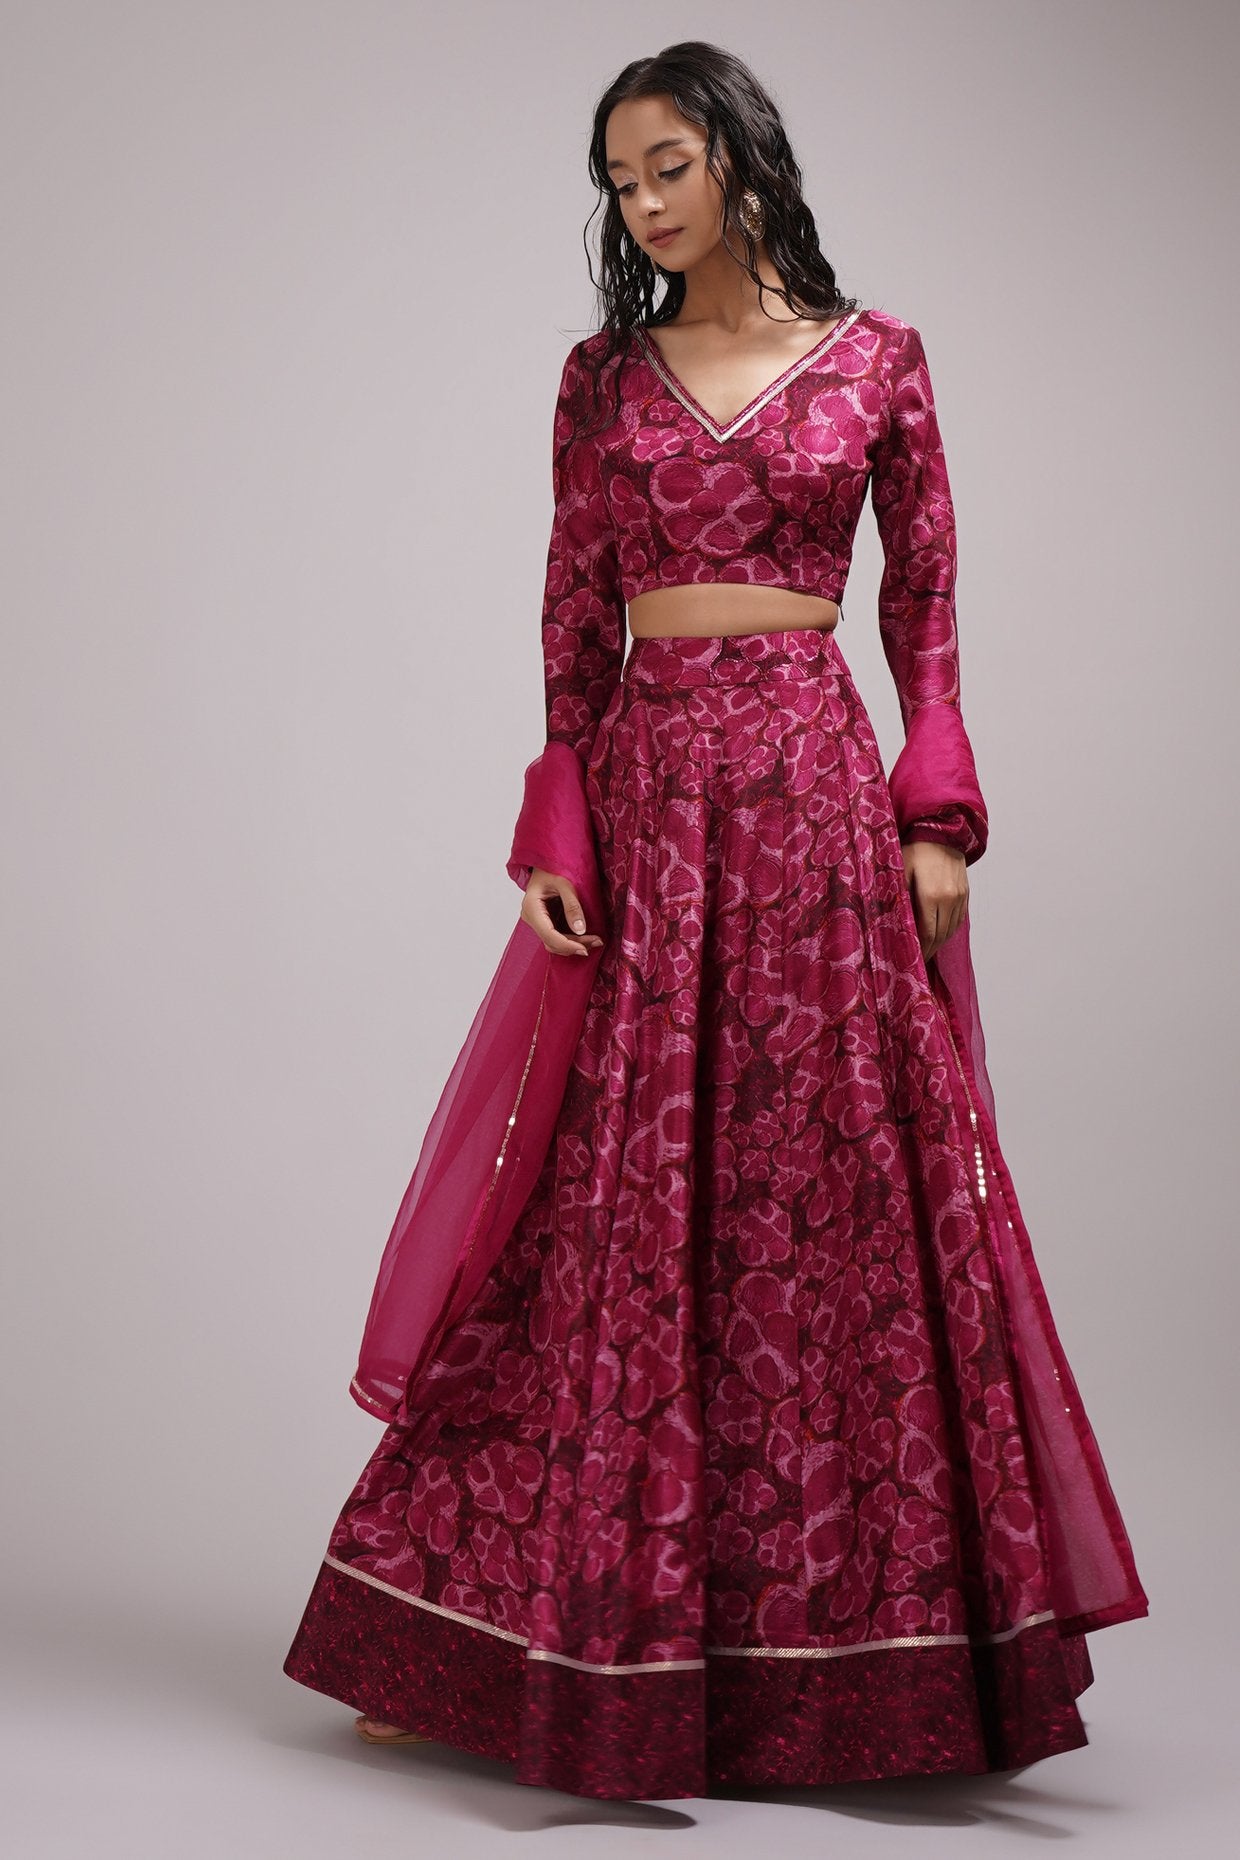 Take Cues From These Wedding Lehenga Blouse Designs For Your Big Day